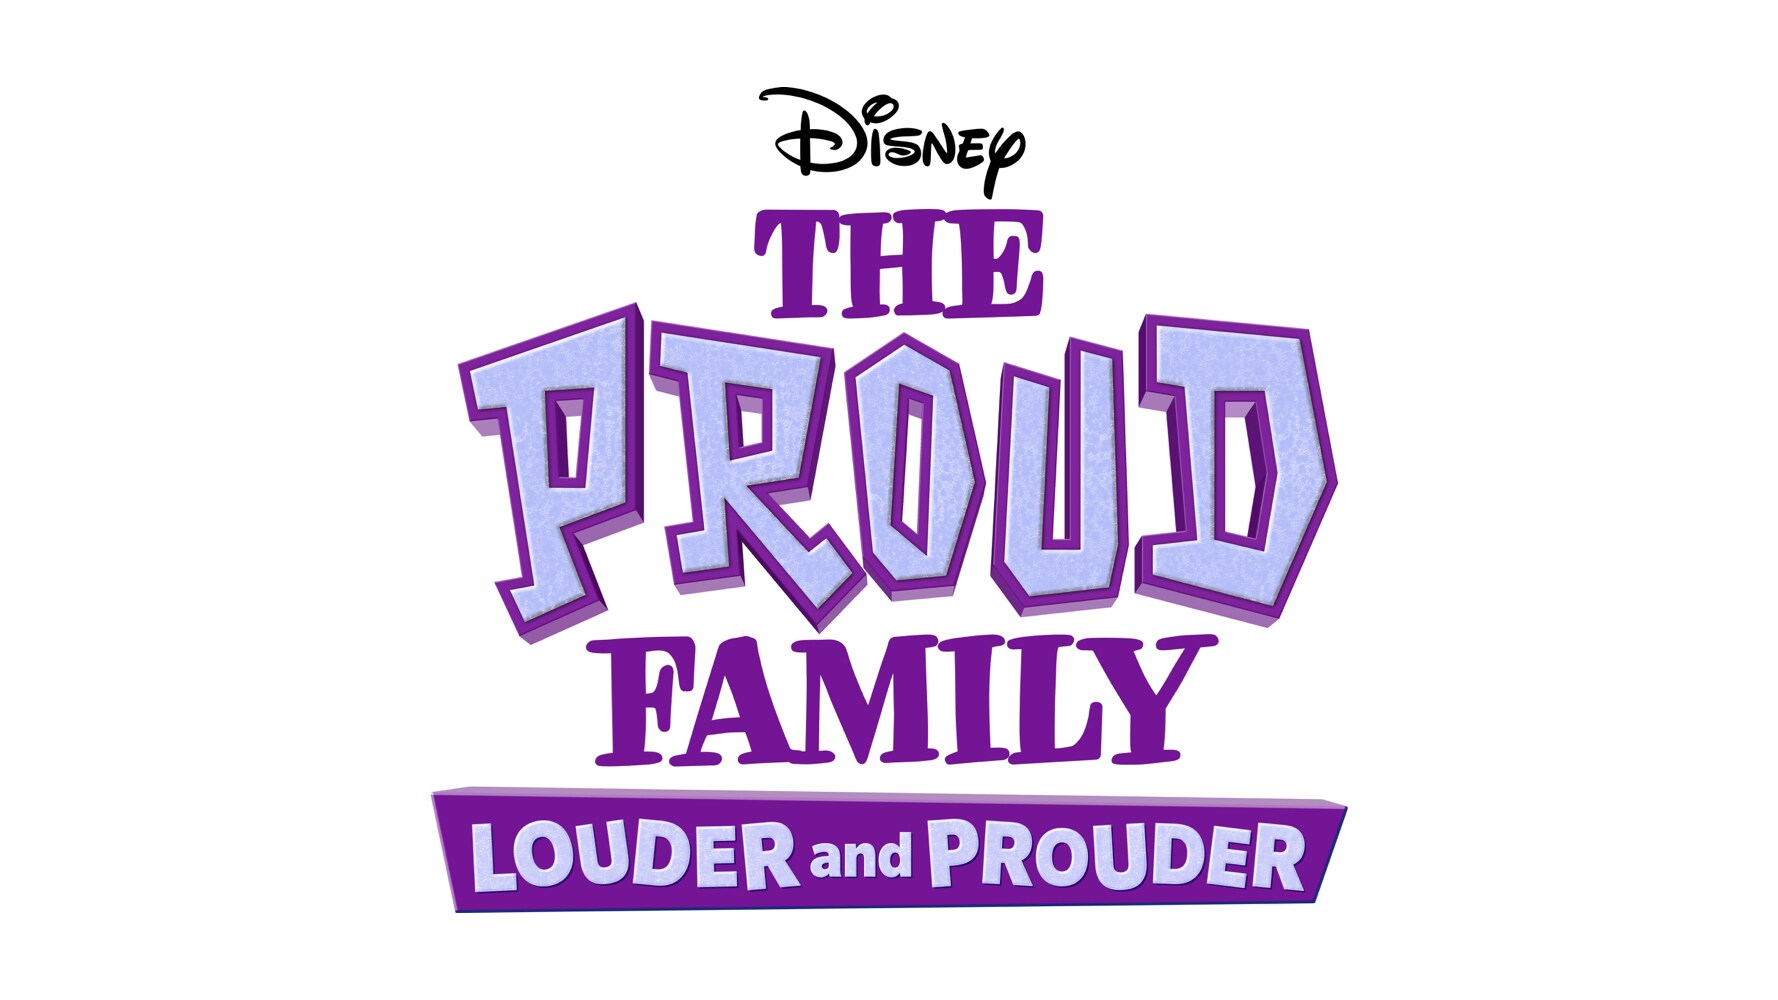 “The Proud Family” Cast And Creative Team Reunited For NAACP's Arts, Culture & Entertainment Festival